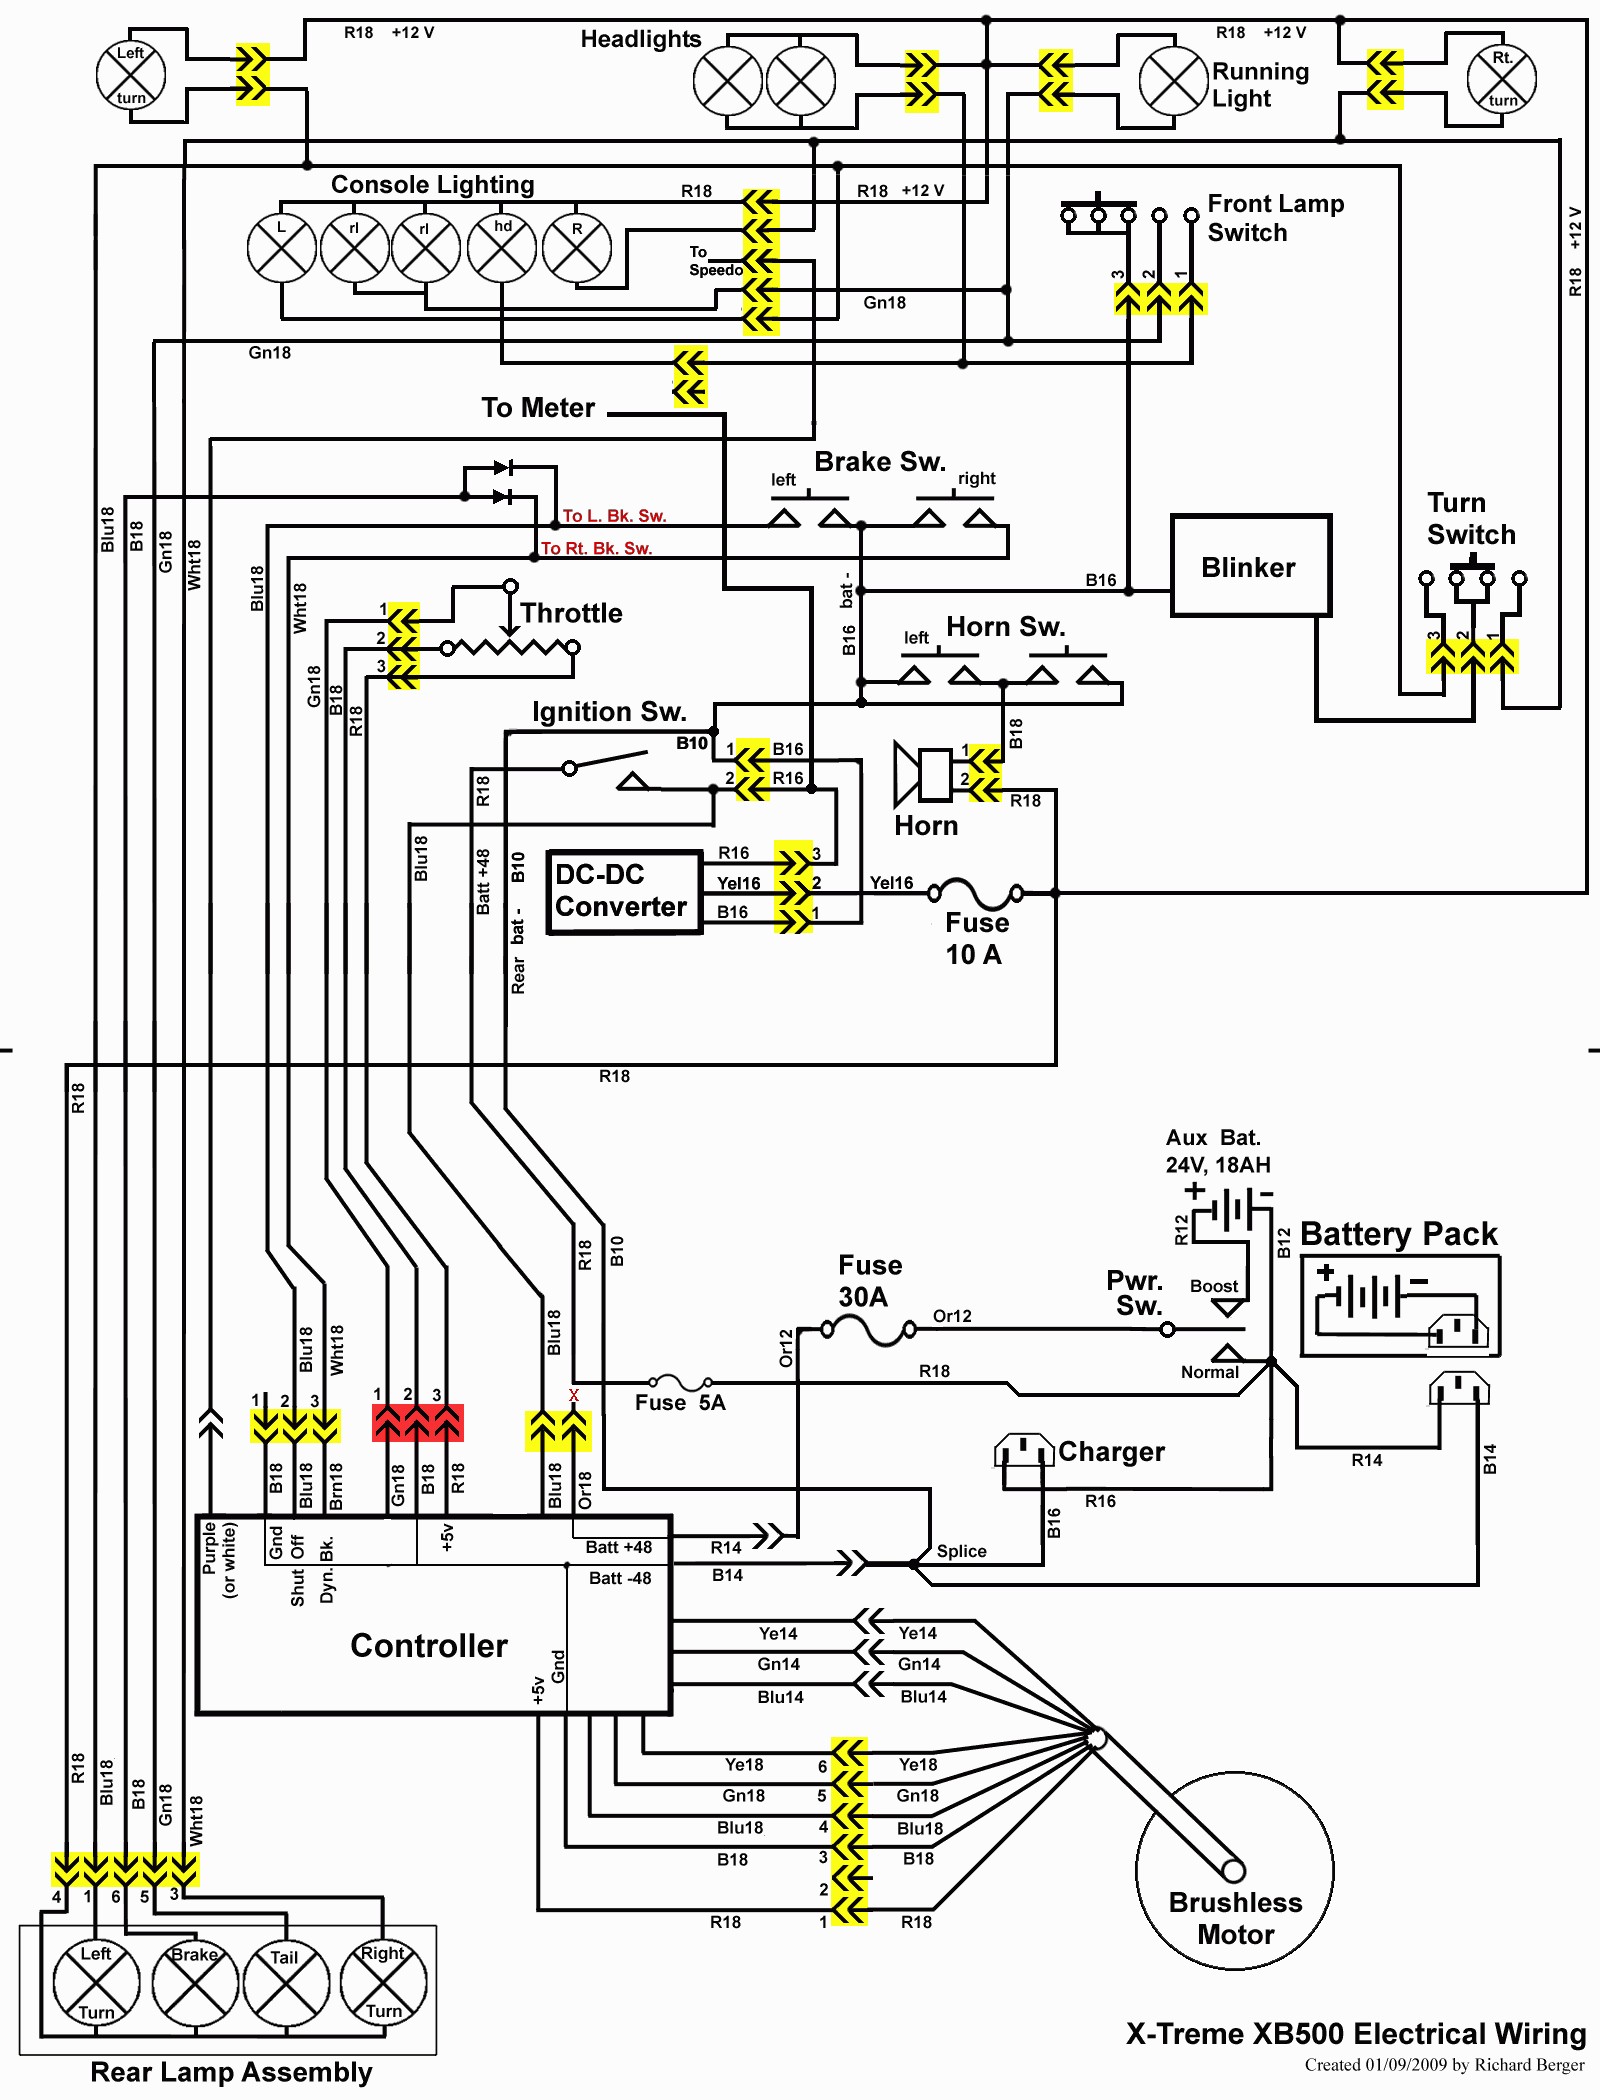 Relocating The Xb With E Bike Controller Wiring Diagram Webtor Me And